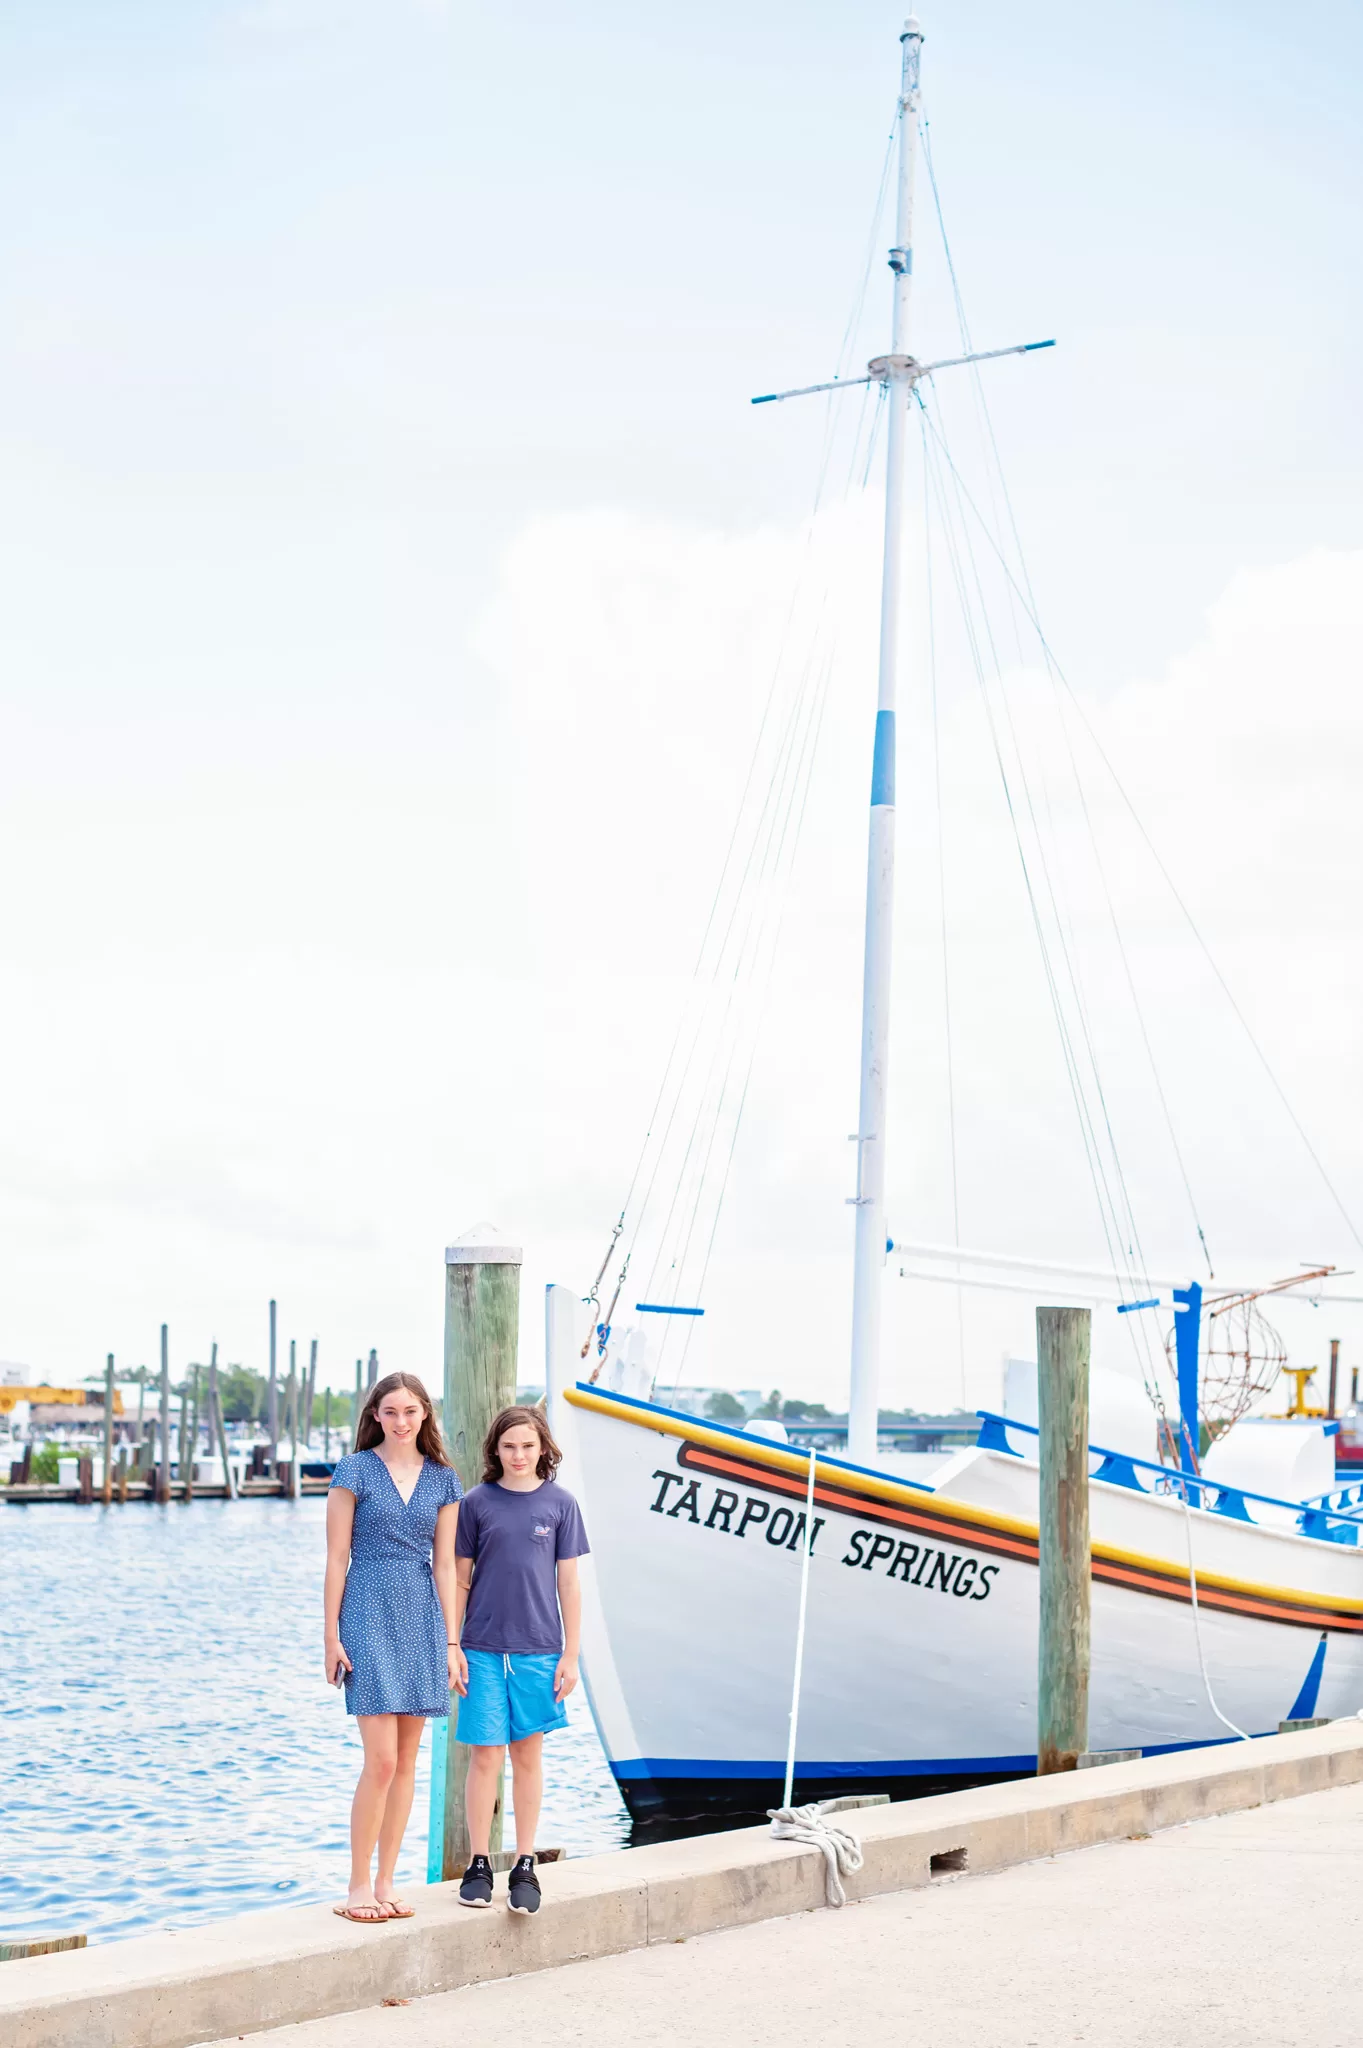 This image is for a blog post about Tarpon Springs Florida and shows two kids standing next to a sponge boat that says Tarpon Springs on it. The kids are wearing blue and it's a sunny day.